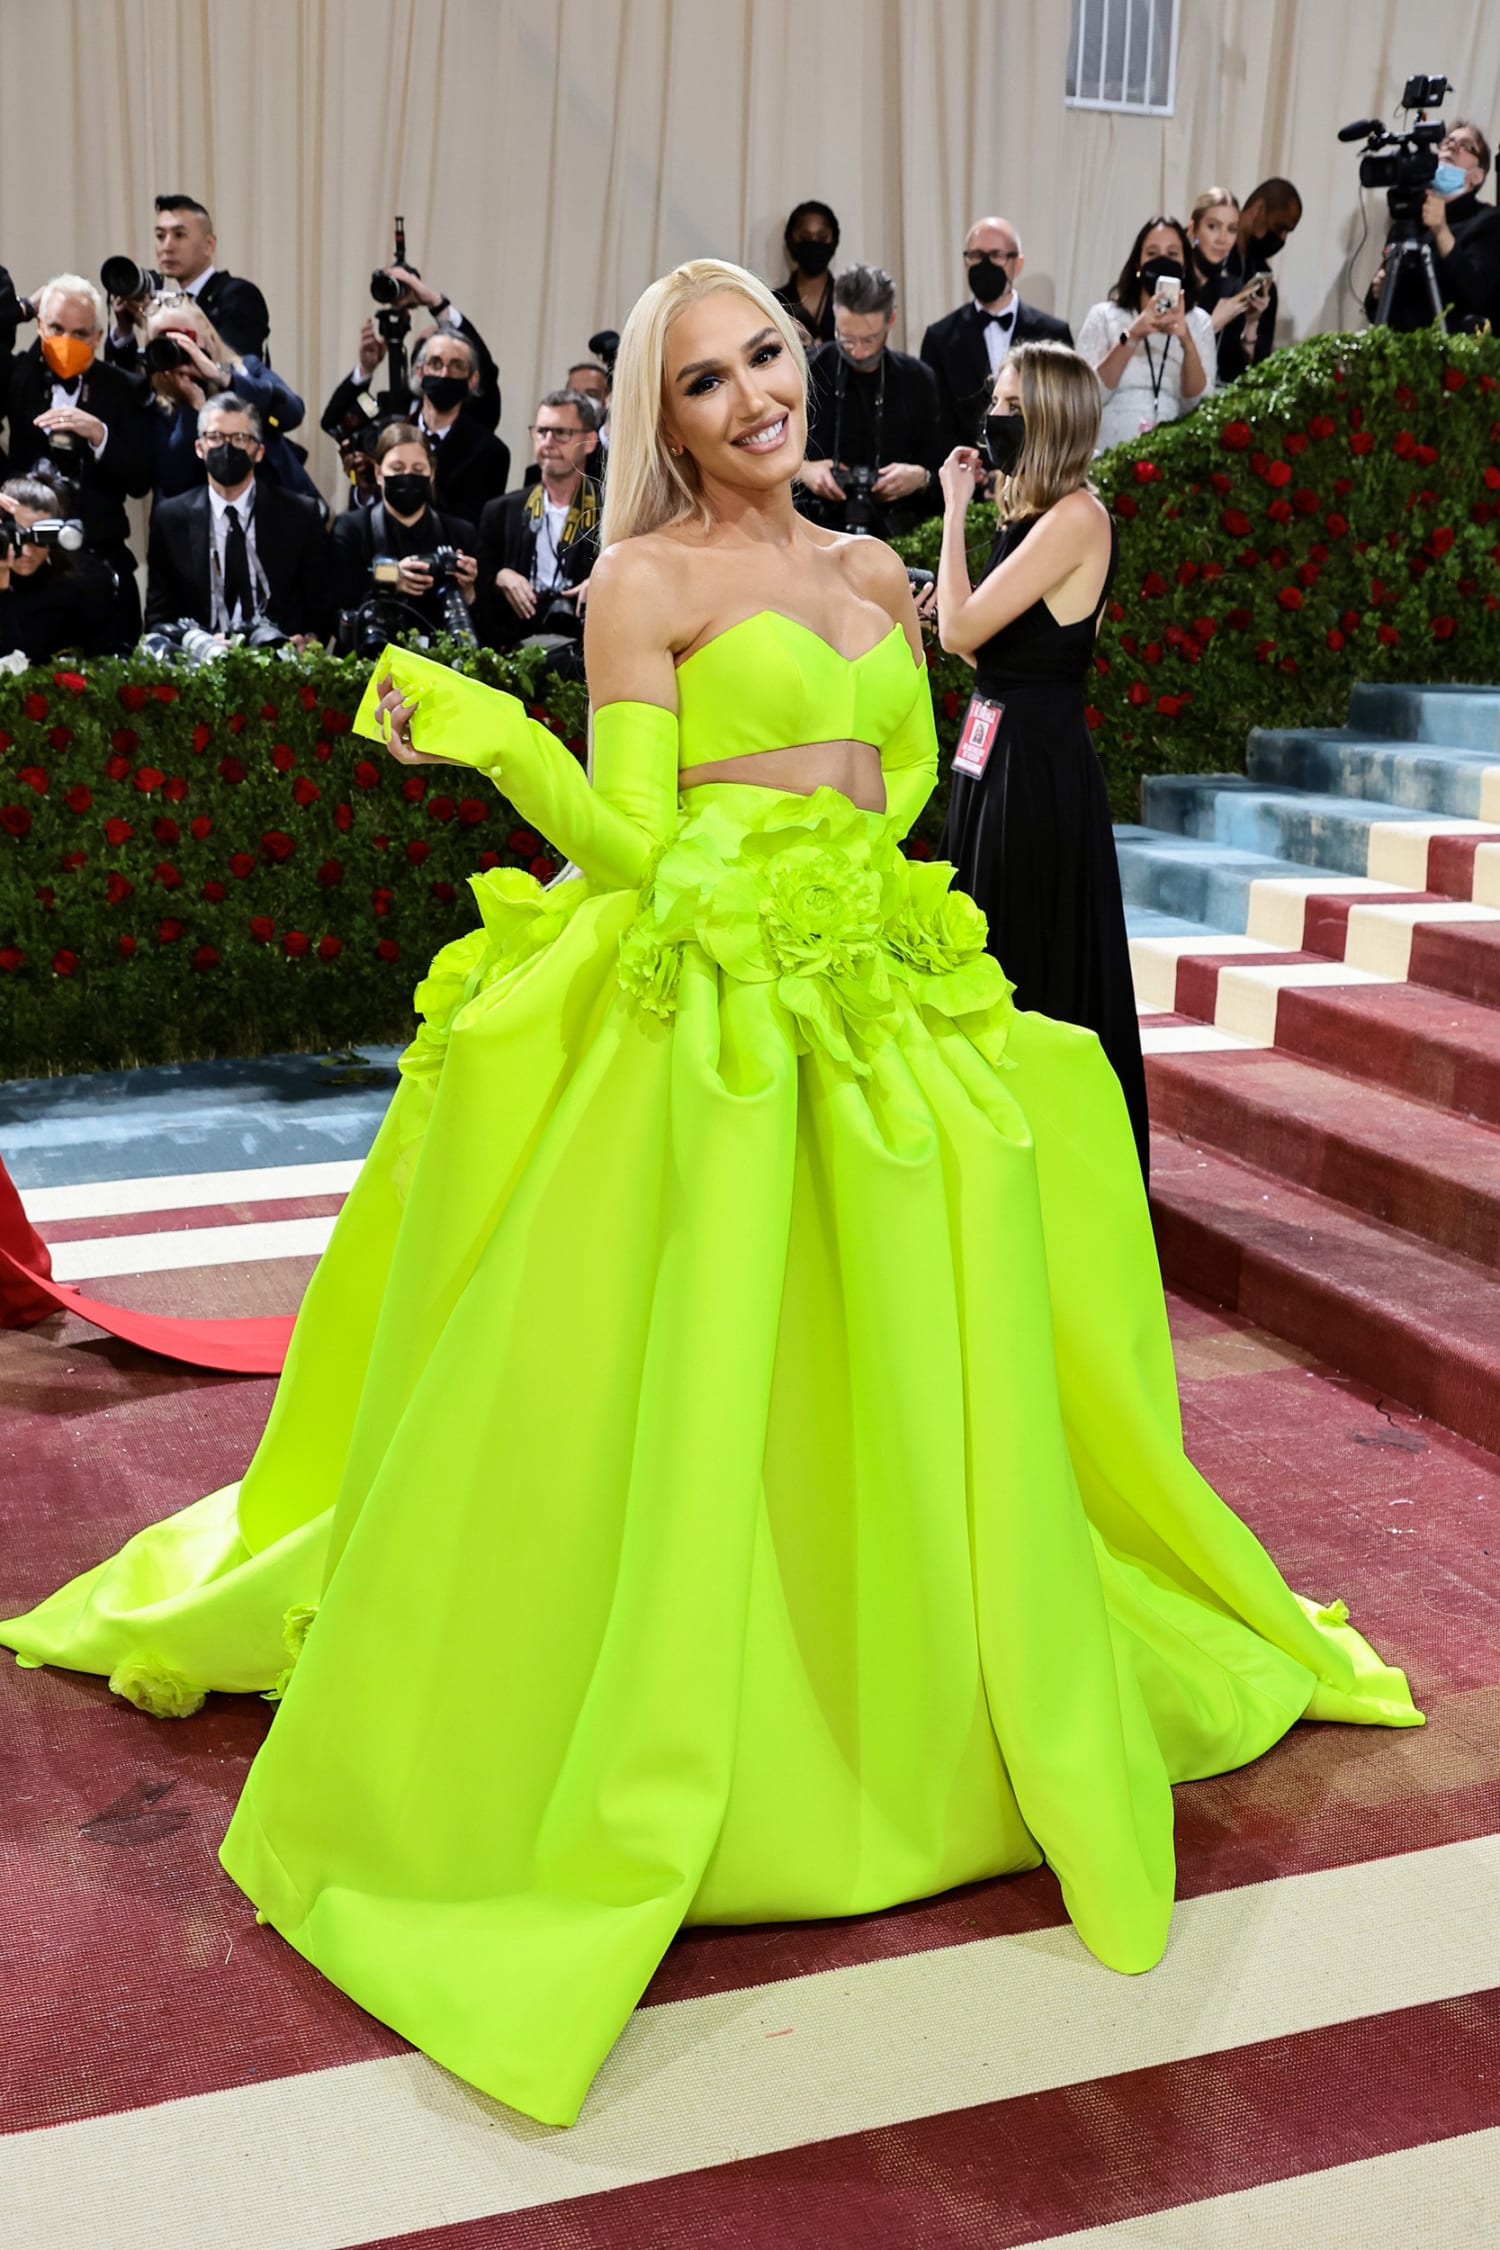 20 Outrageous Looks That Prove the Met Gala Is the Only Red Carpet